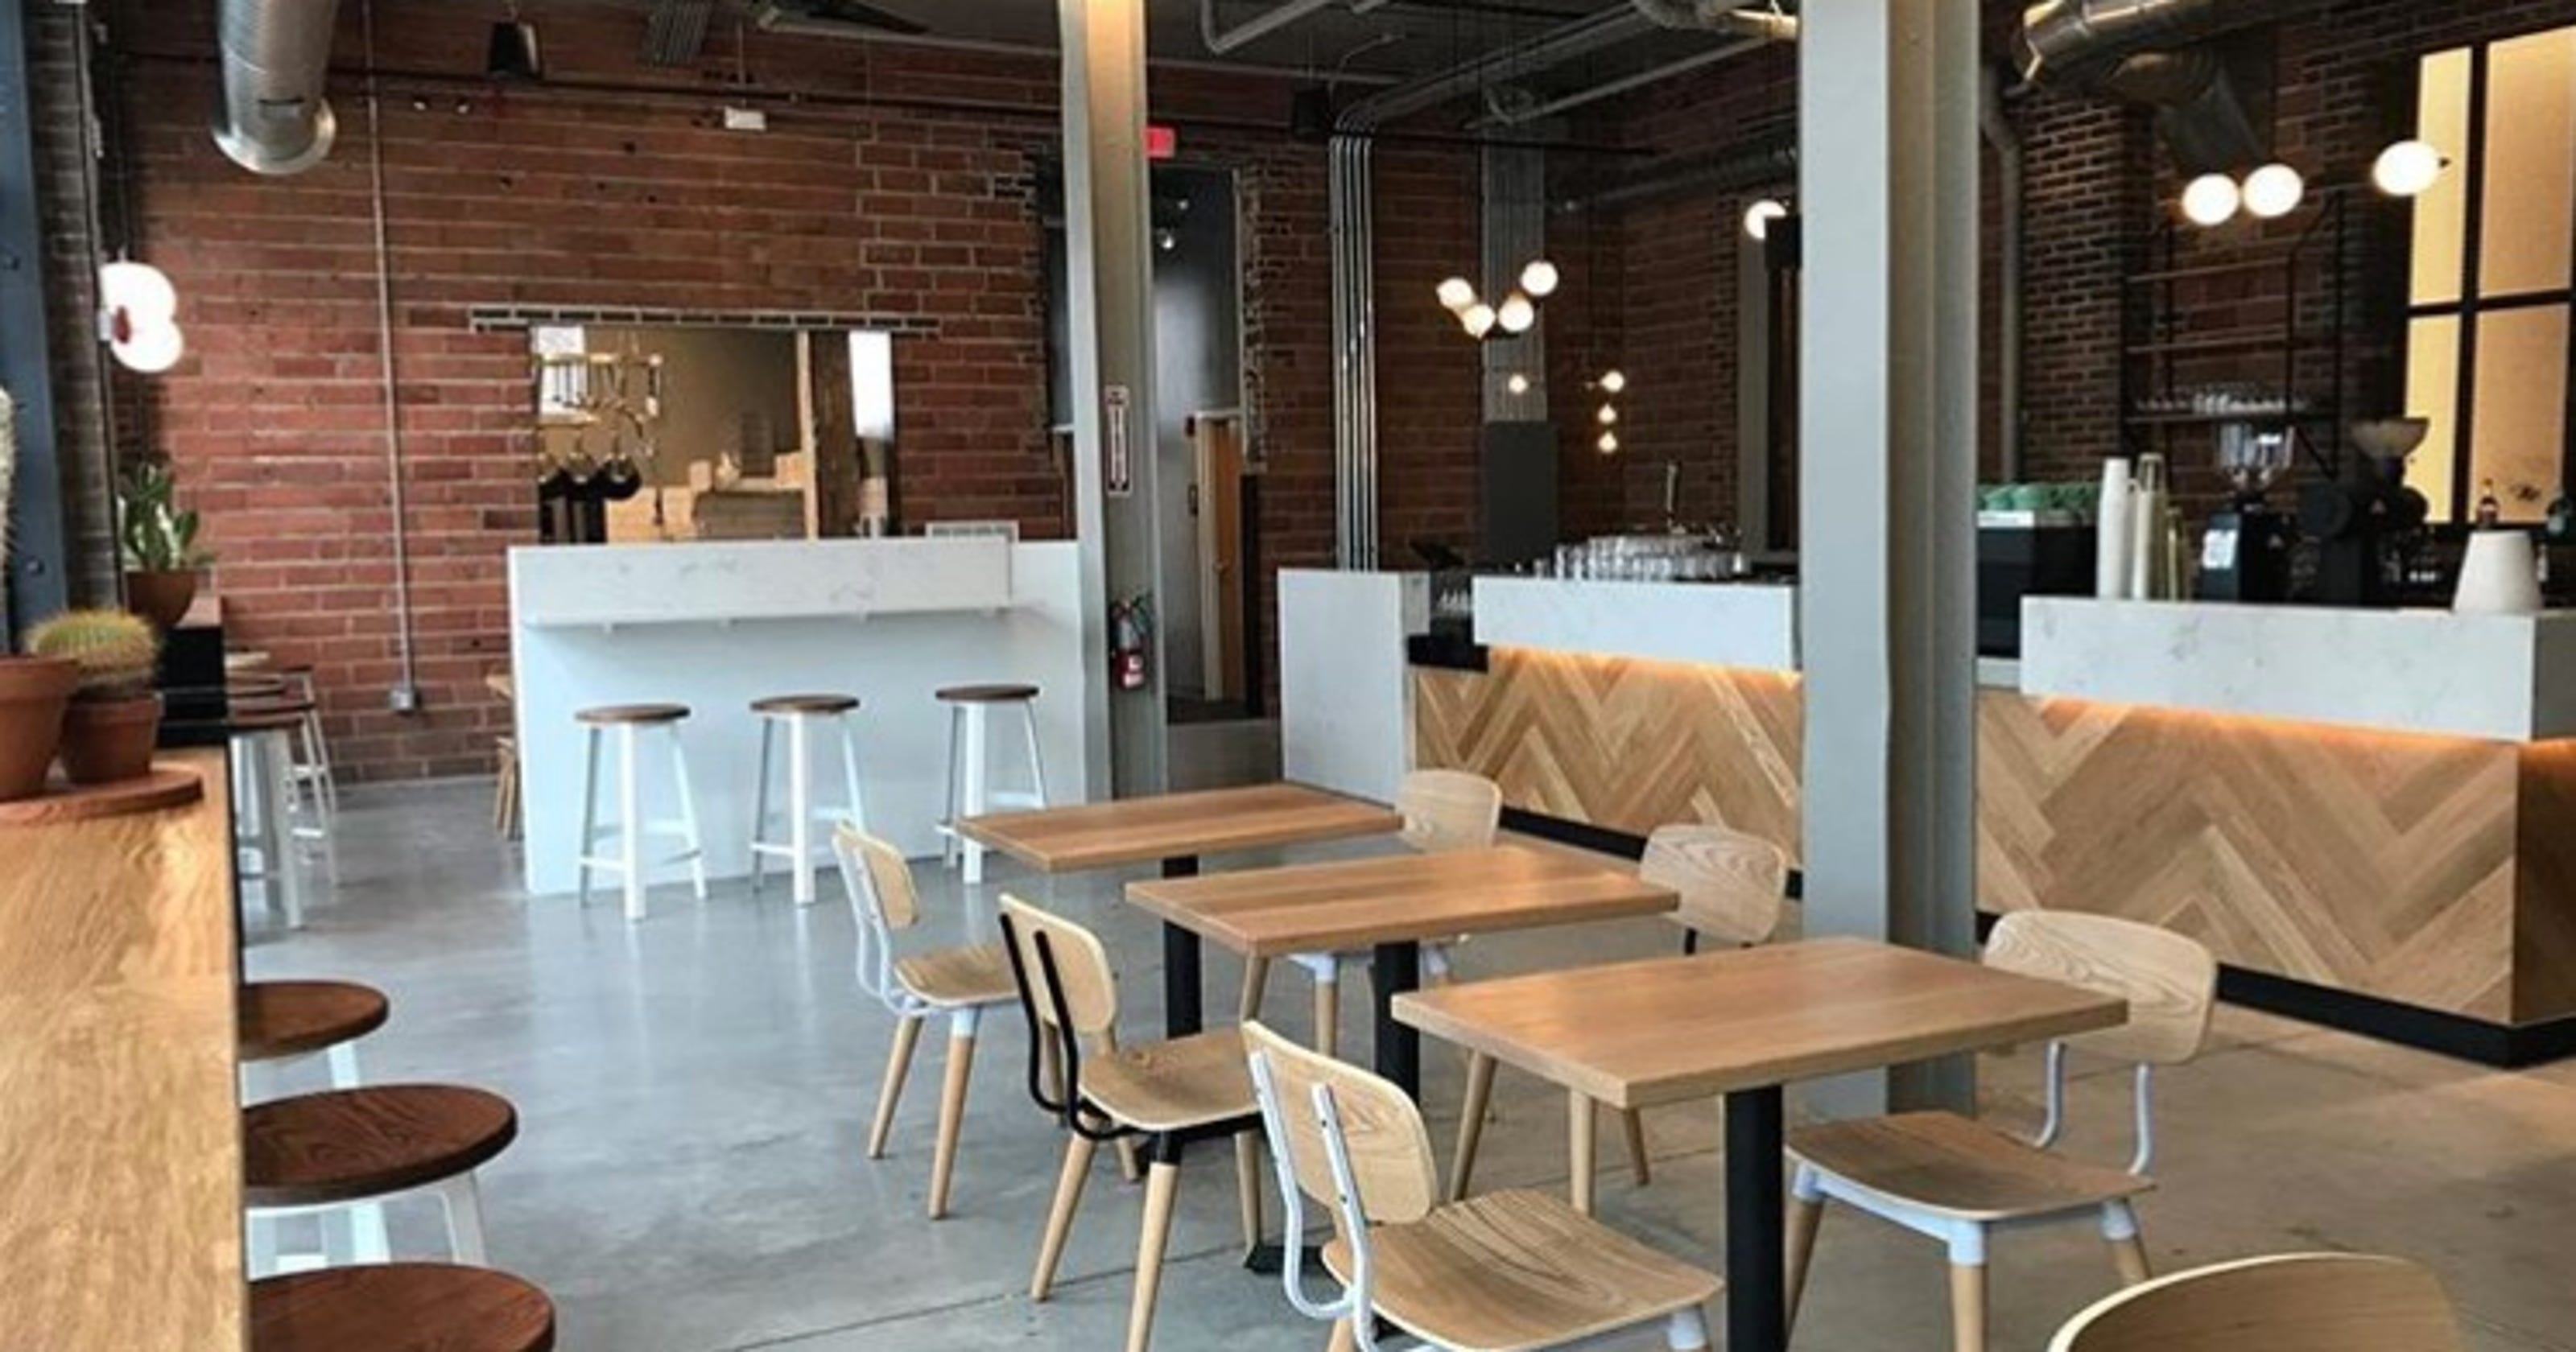 Australian-style bakery and cafe opens Tuesday in downtown Des Moines